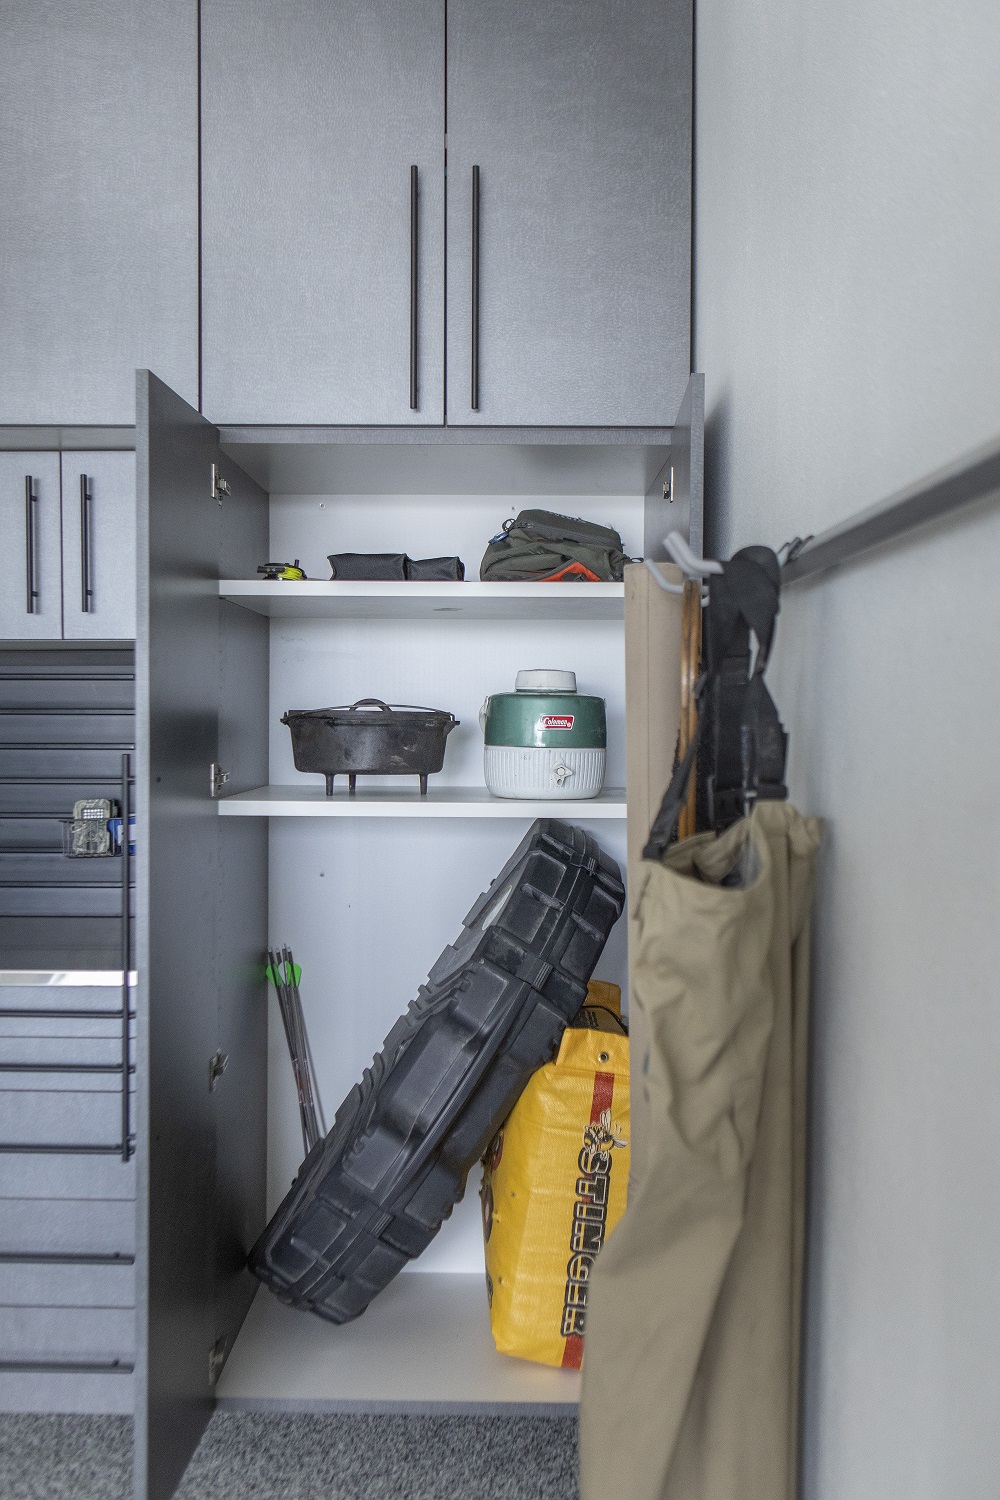 Camping Gear in Cabinets